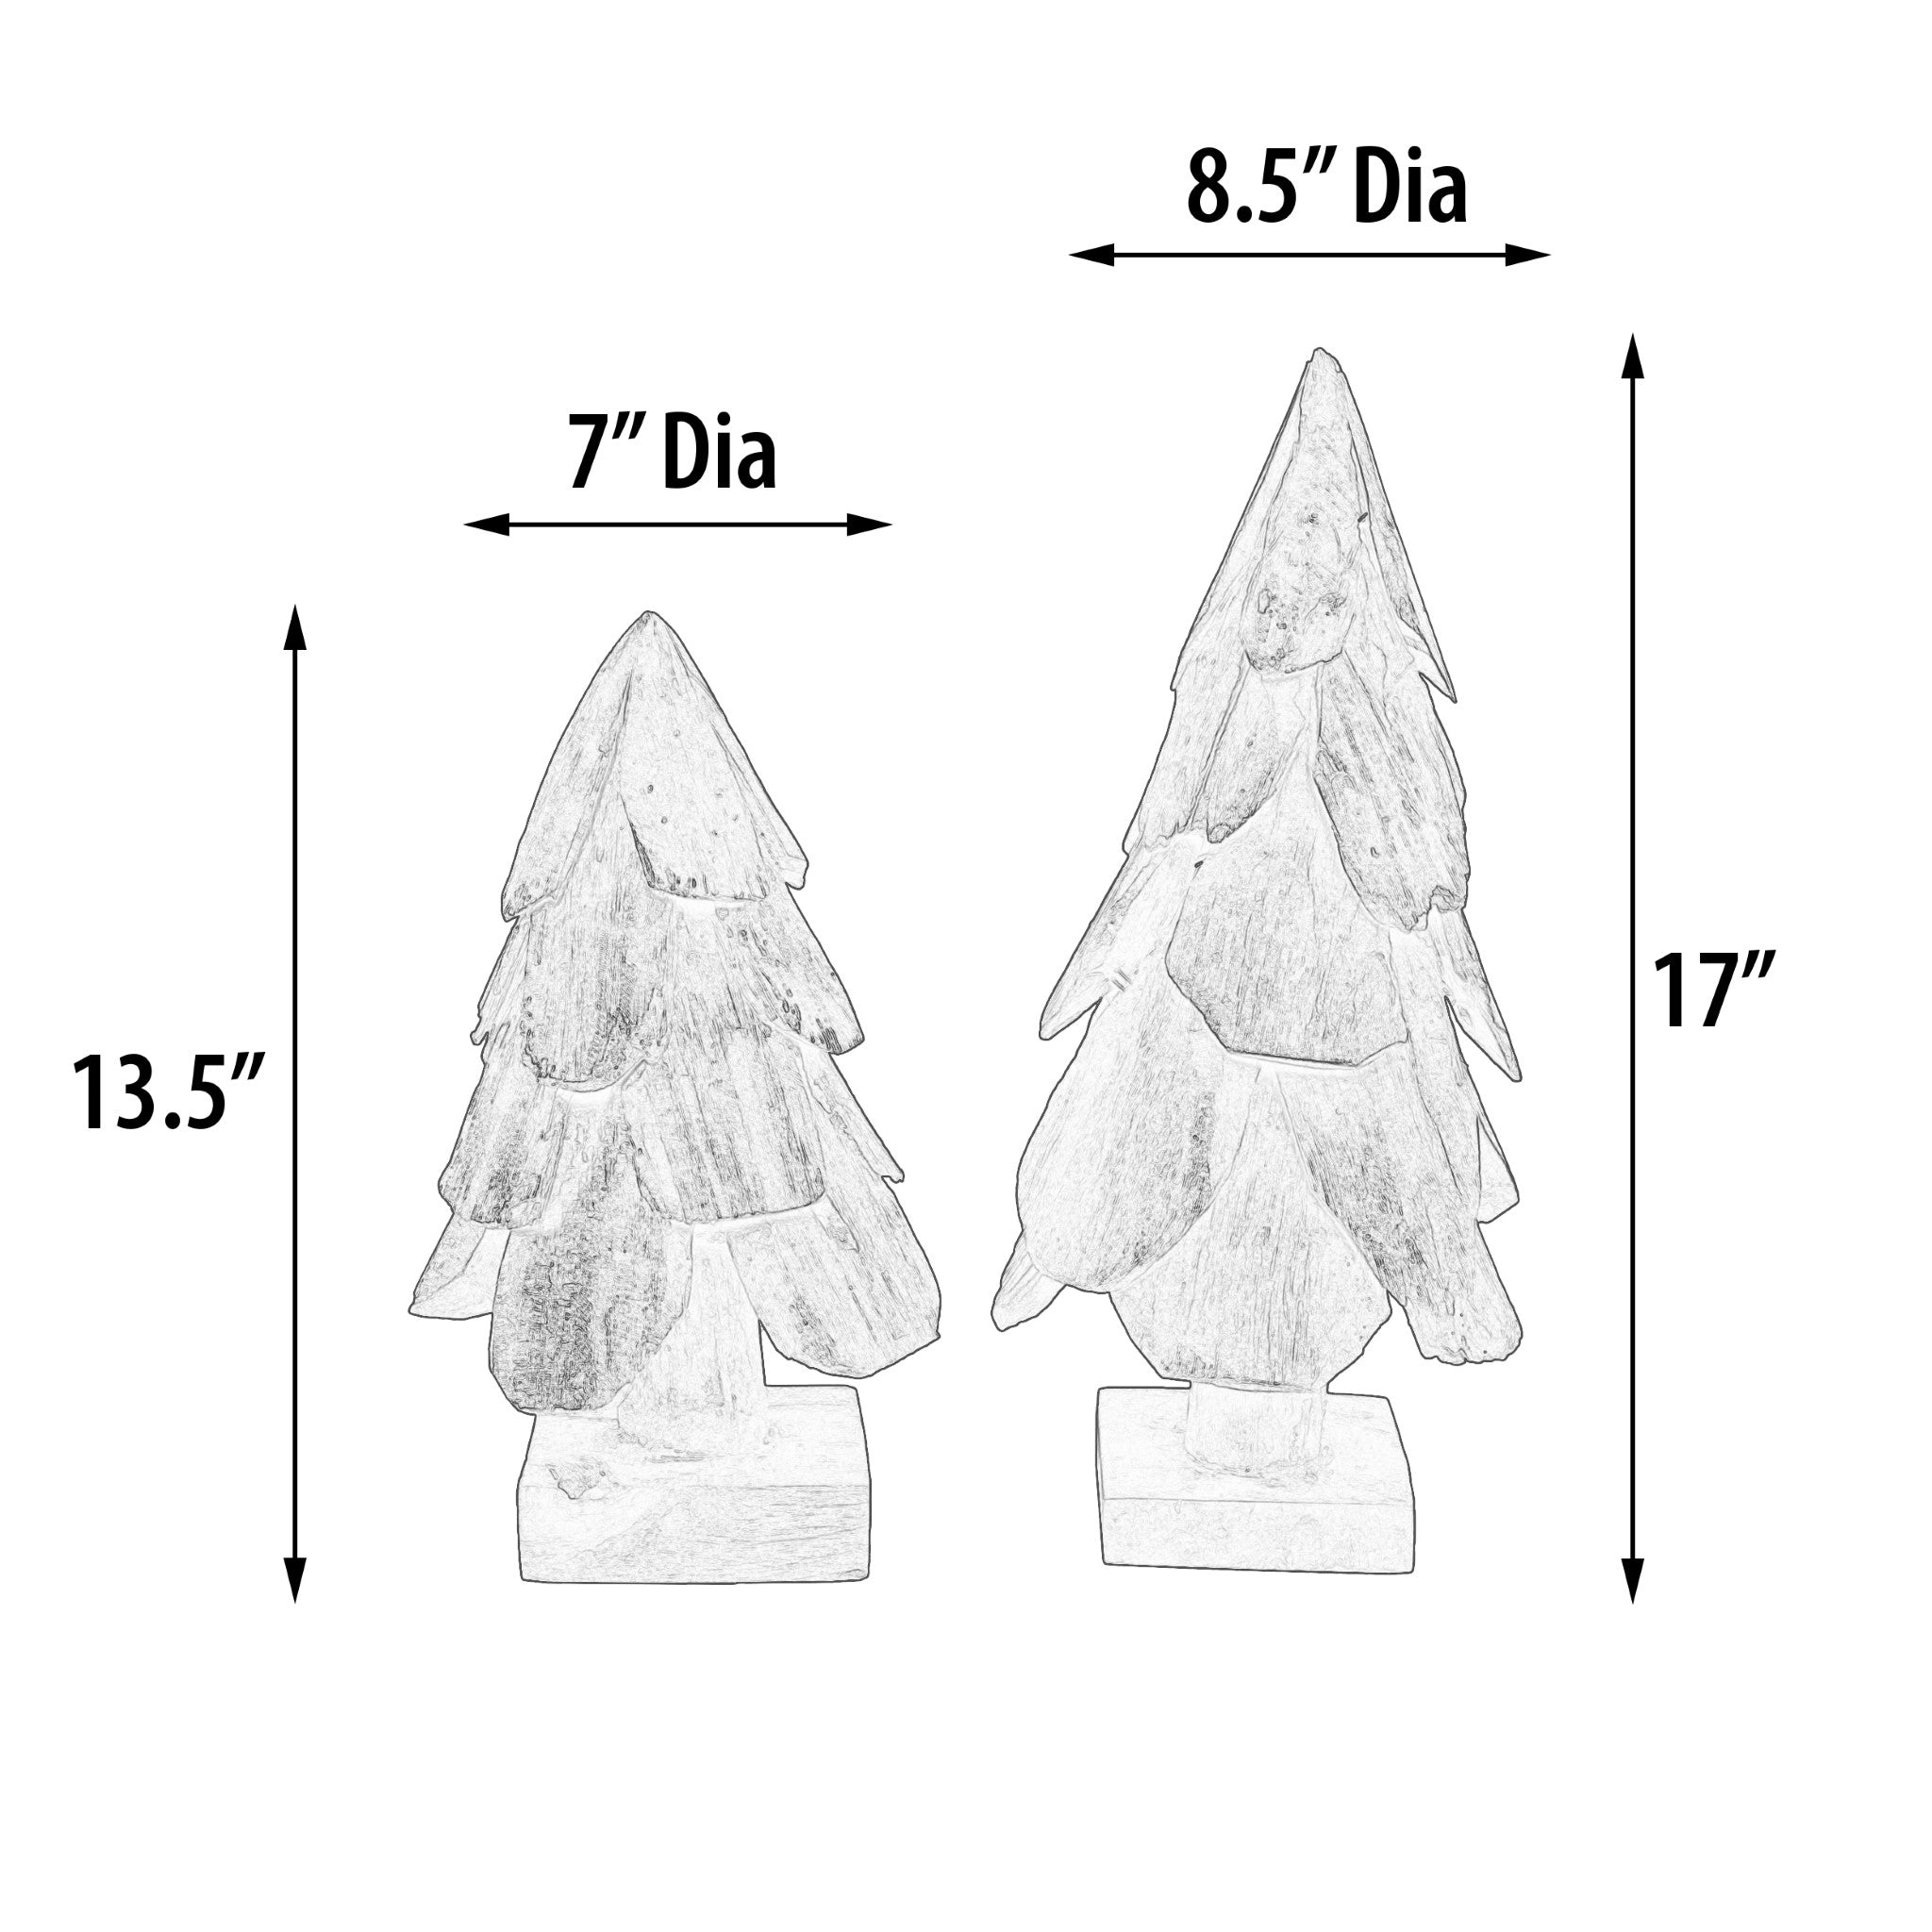 AFD Home  Teak Wood Pine Tree in a Stand Set of 2 - New Star Living